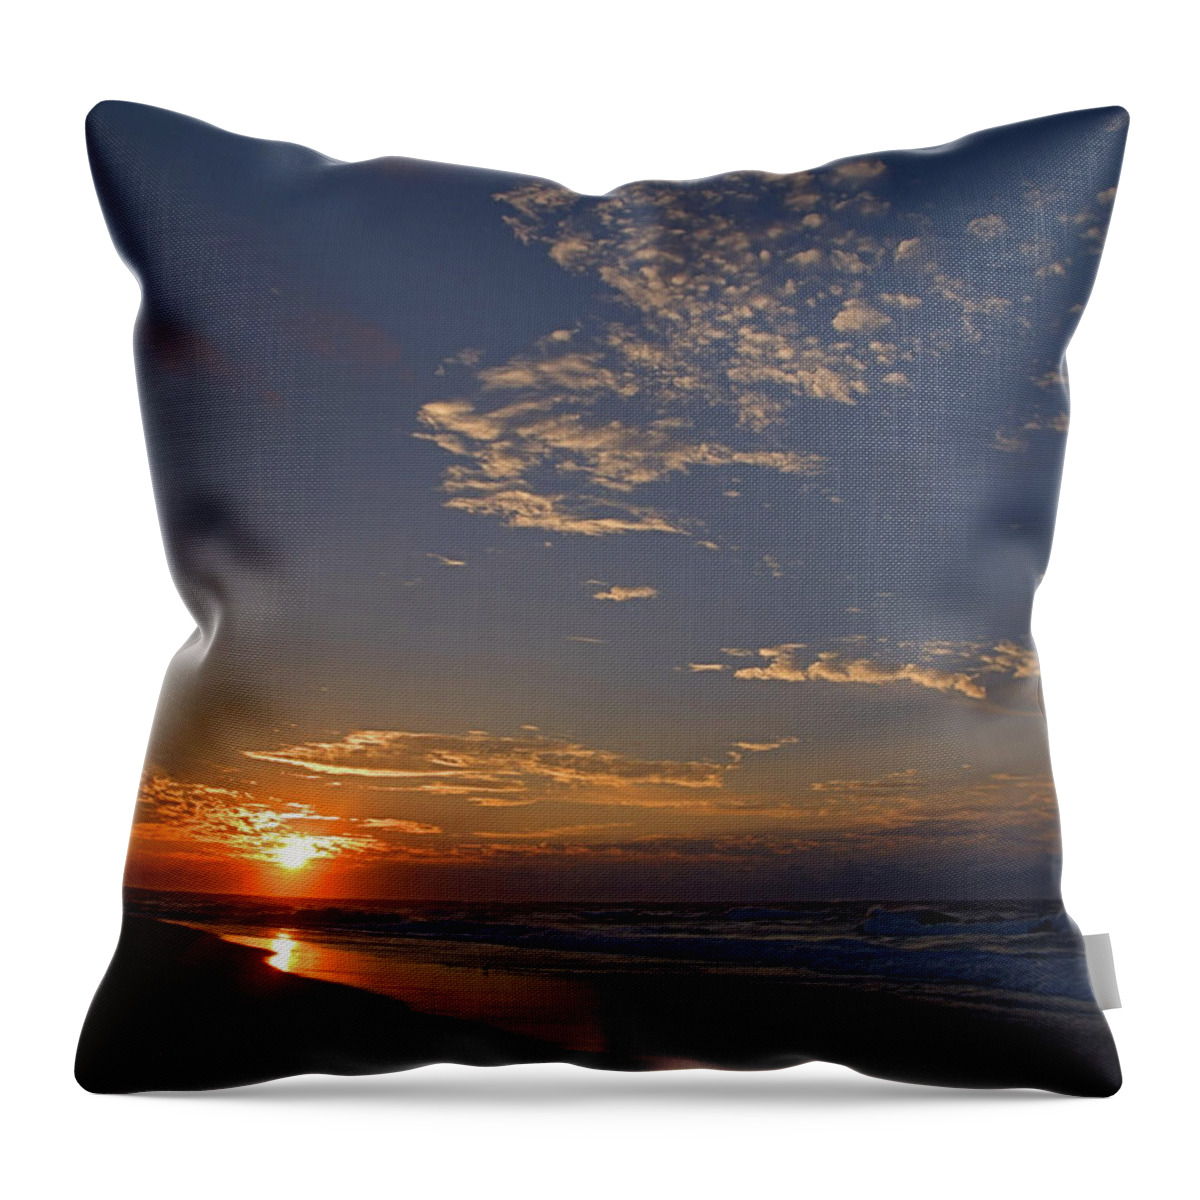 Seas Throw Pillow featuring the photograph Beauty by Newwwman